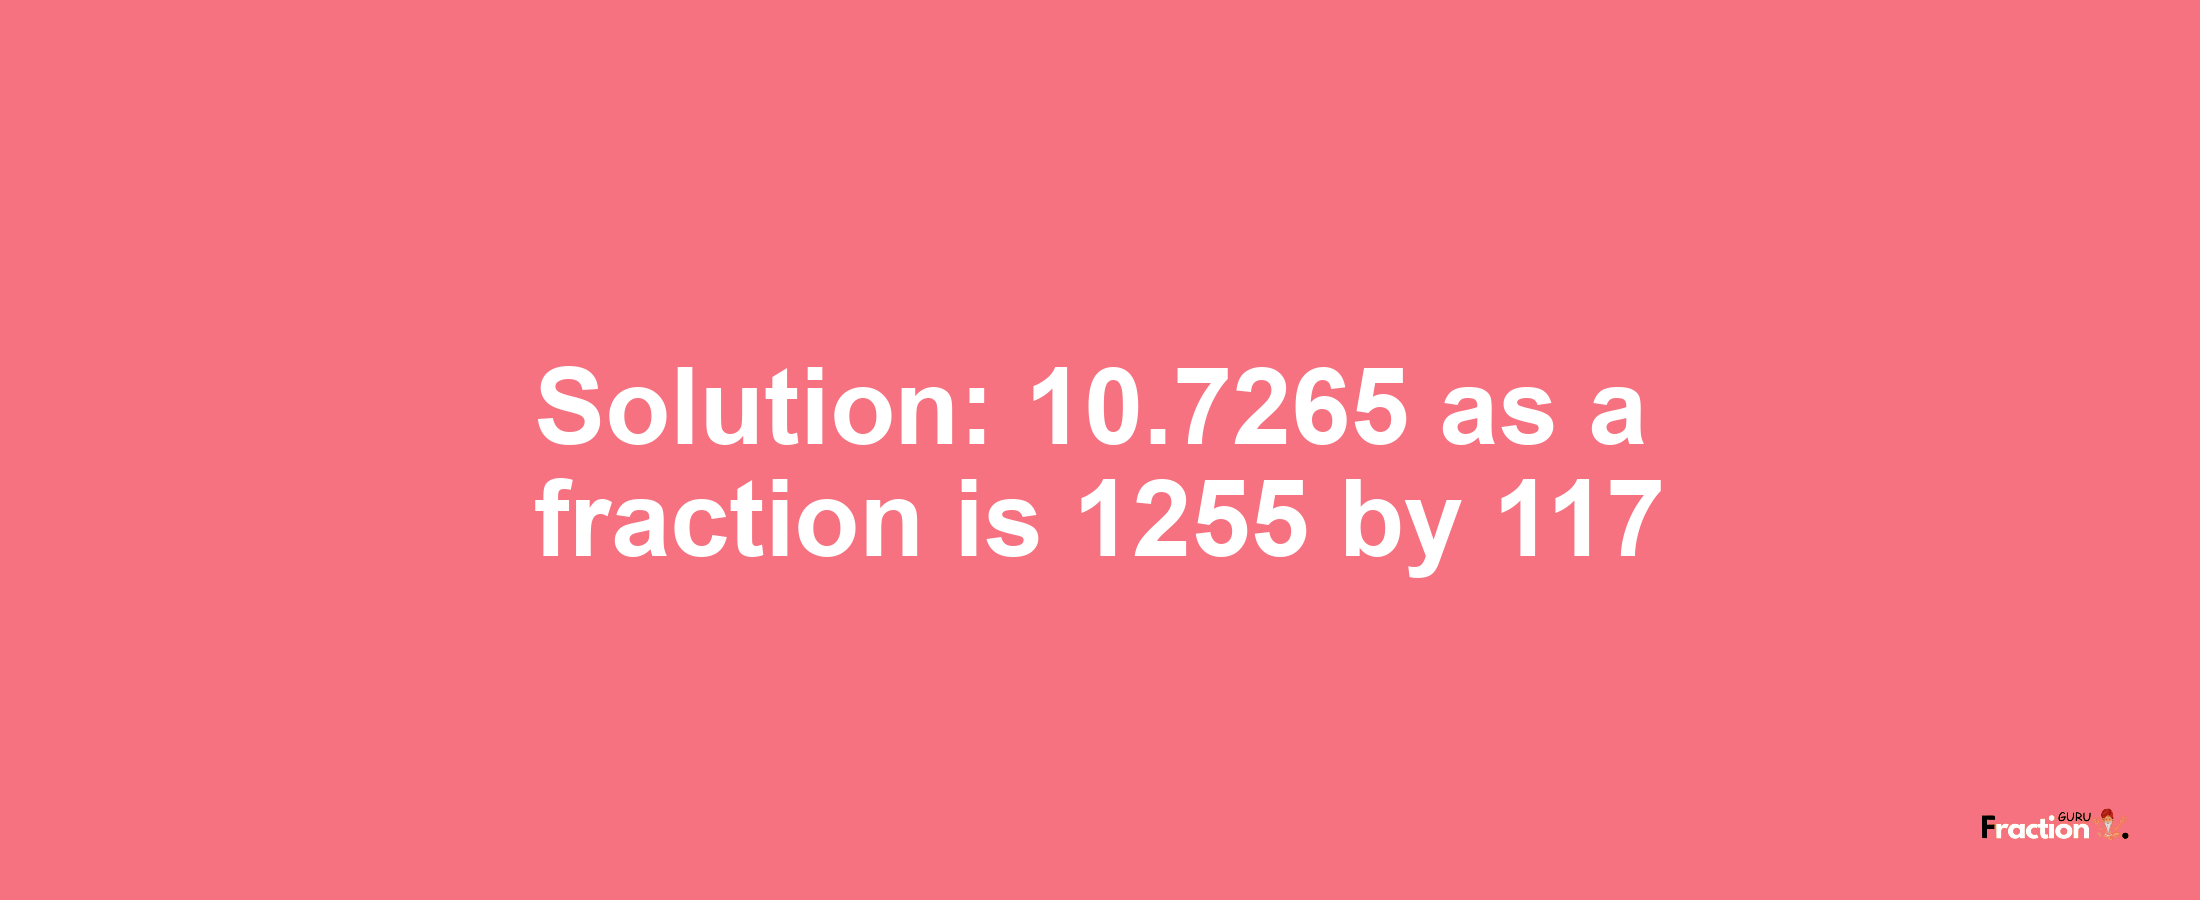 Solution:10.7265 as a fraction is 1255/117